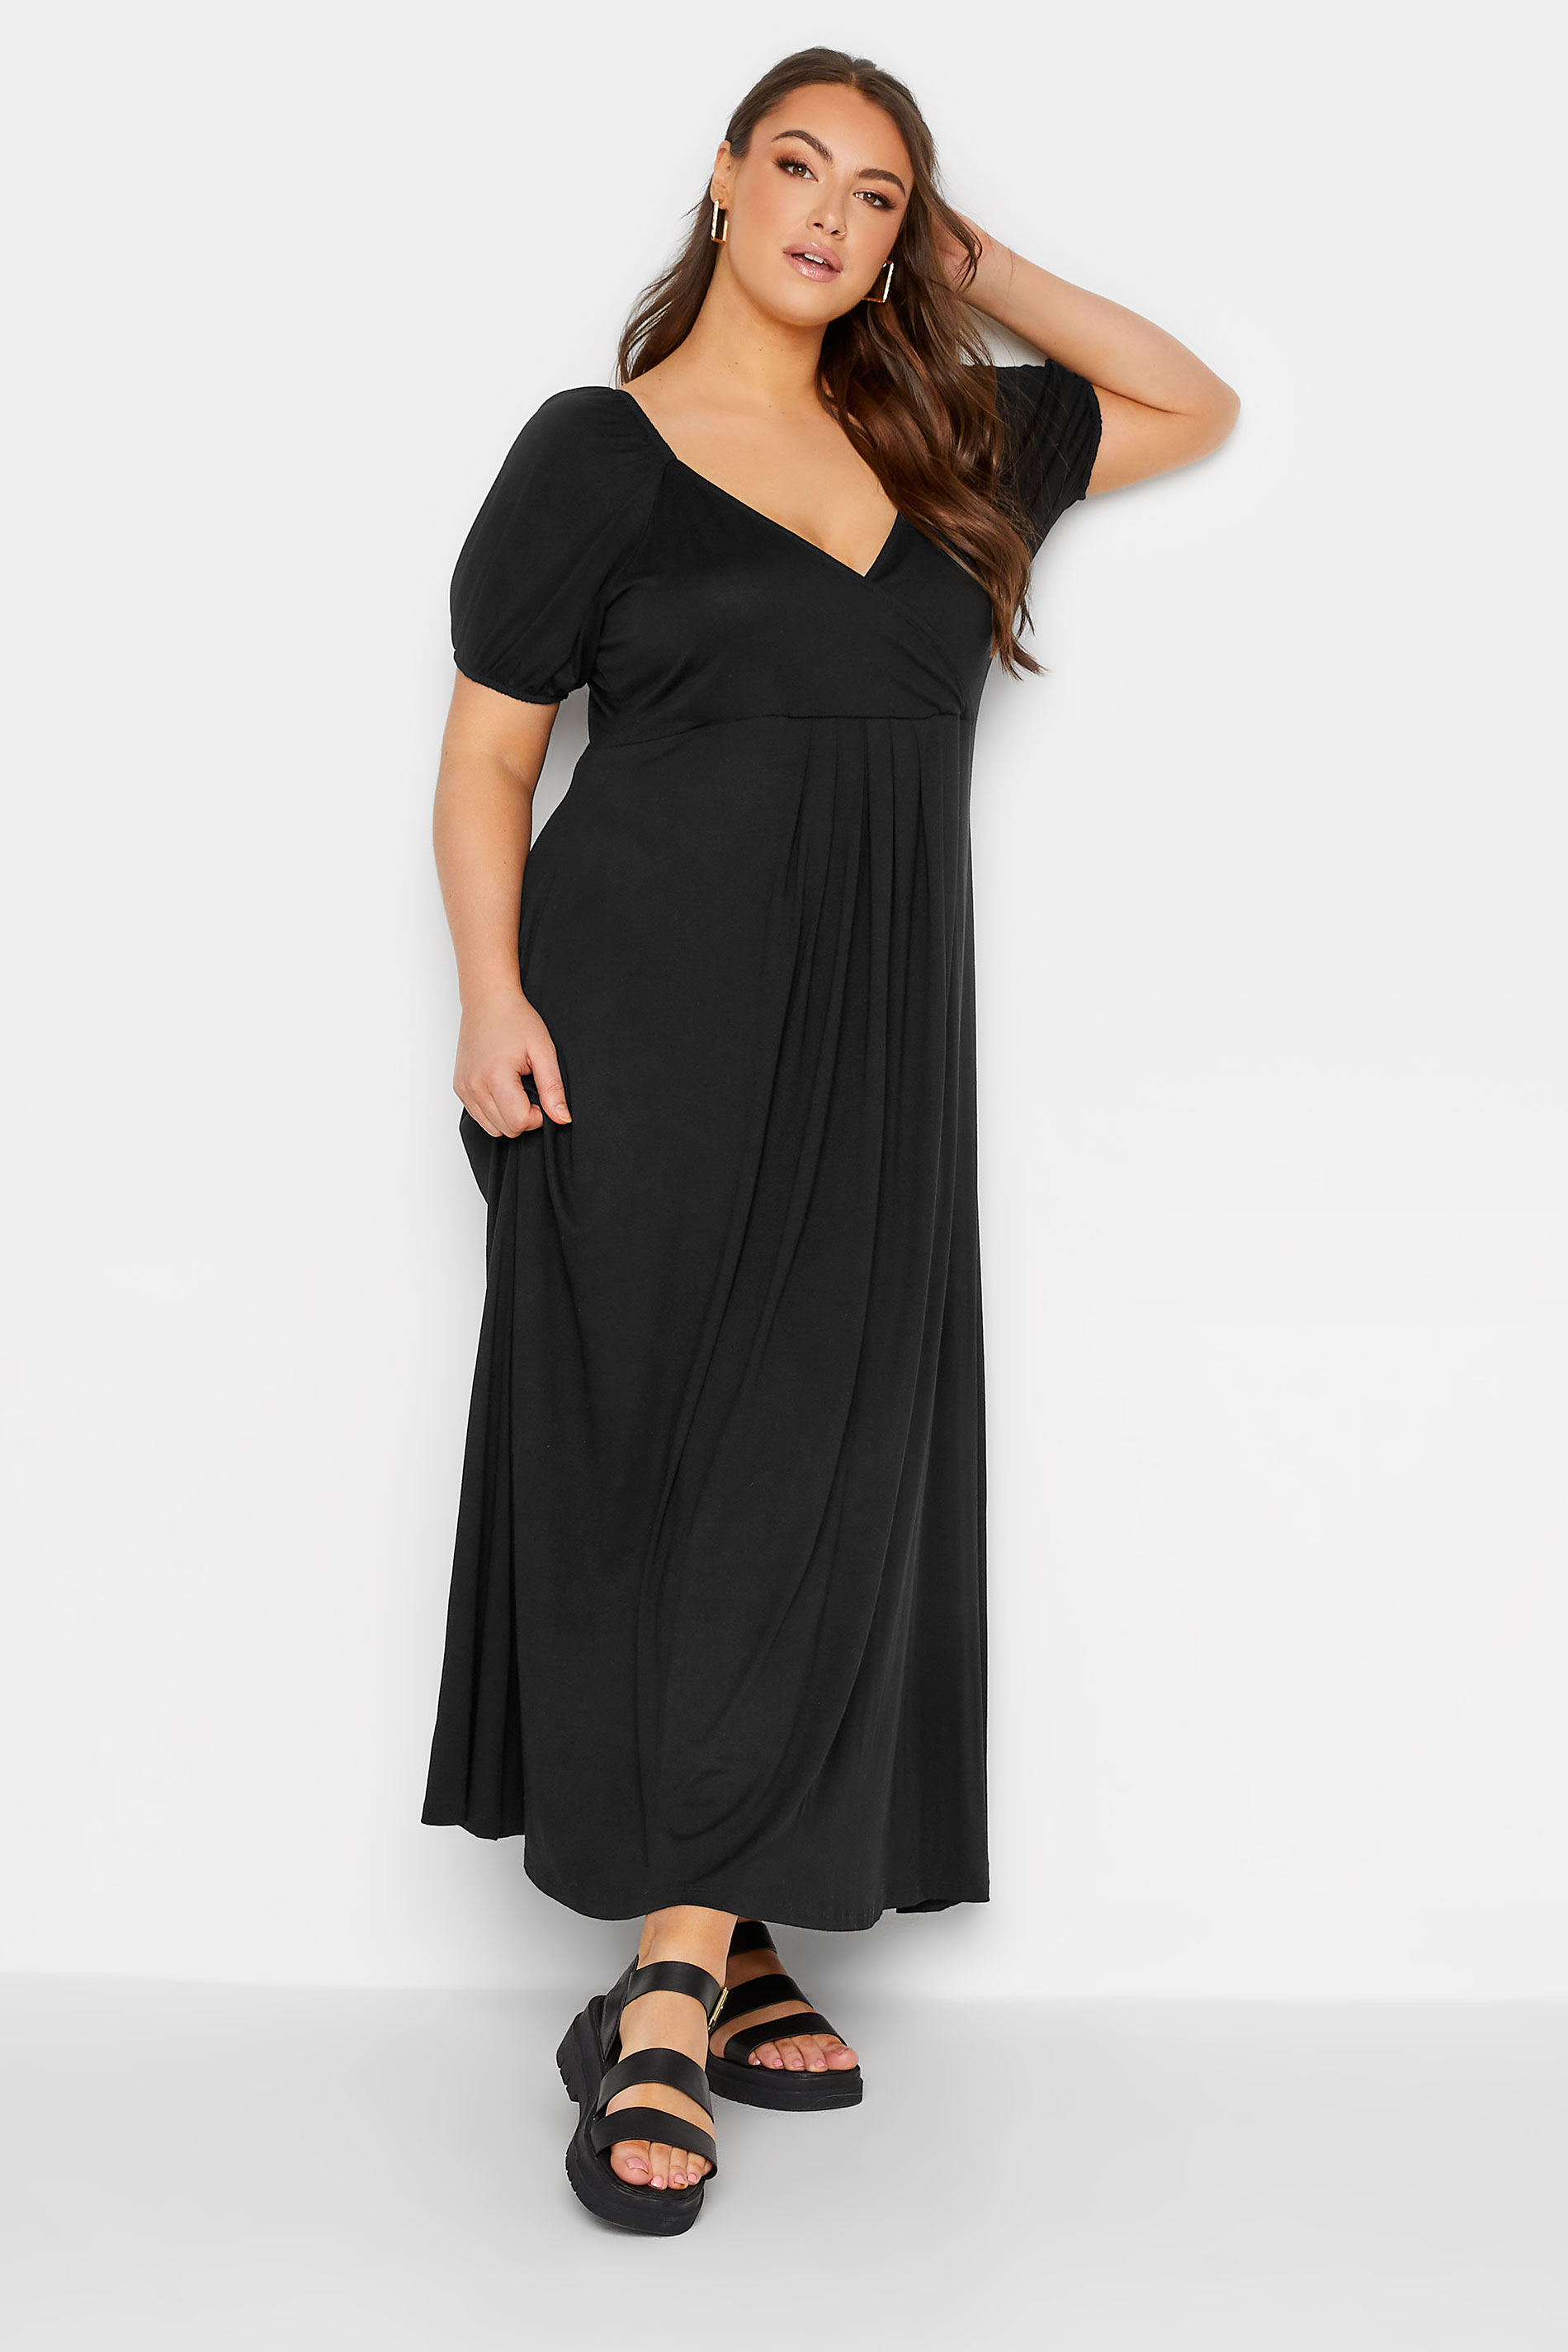 LIMITED COLLECTION Plus Size Black Wrap Maxi Dress | Yours Clothing 2